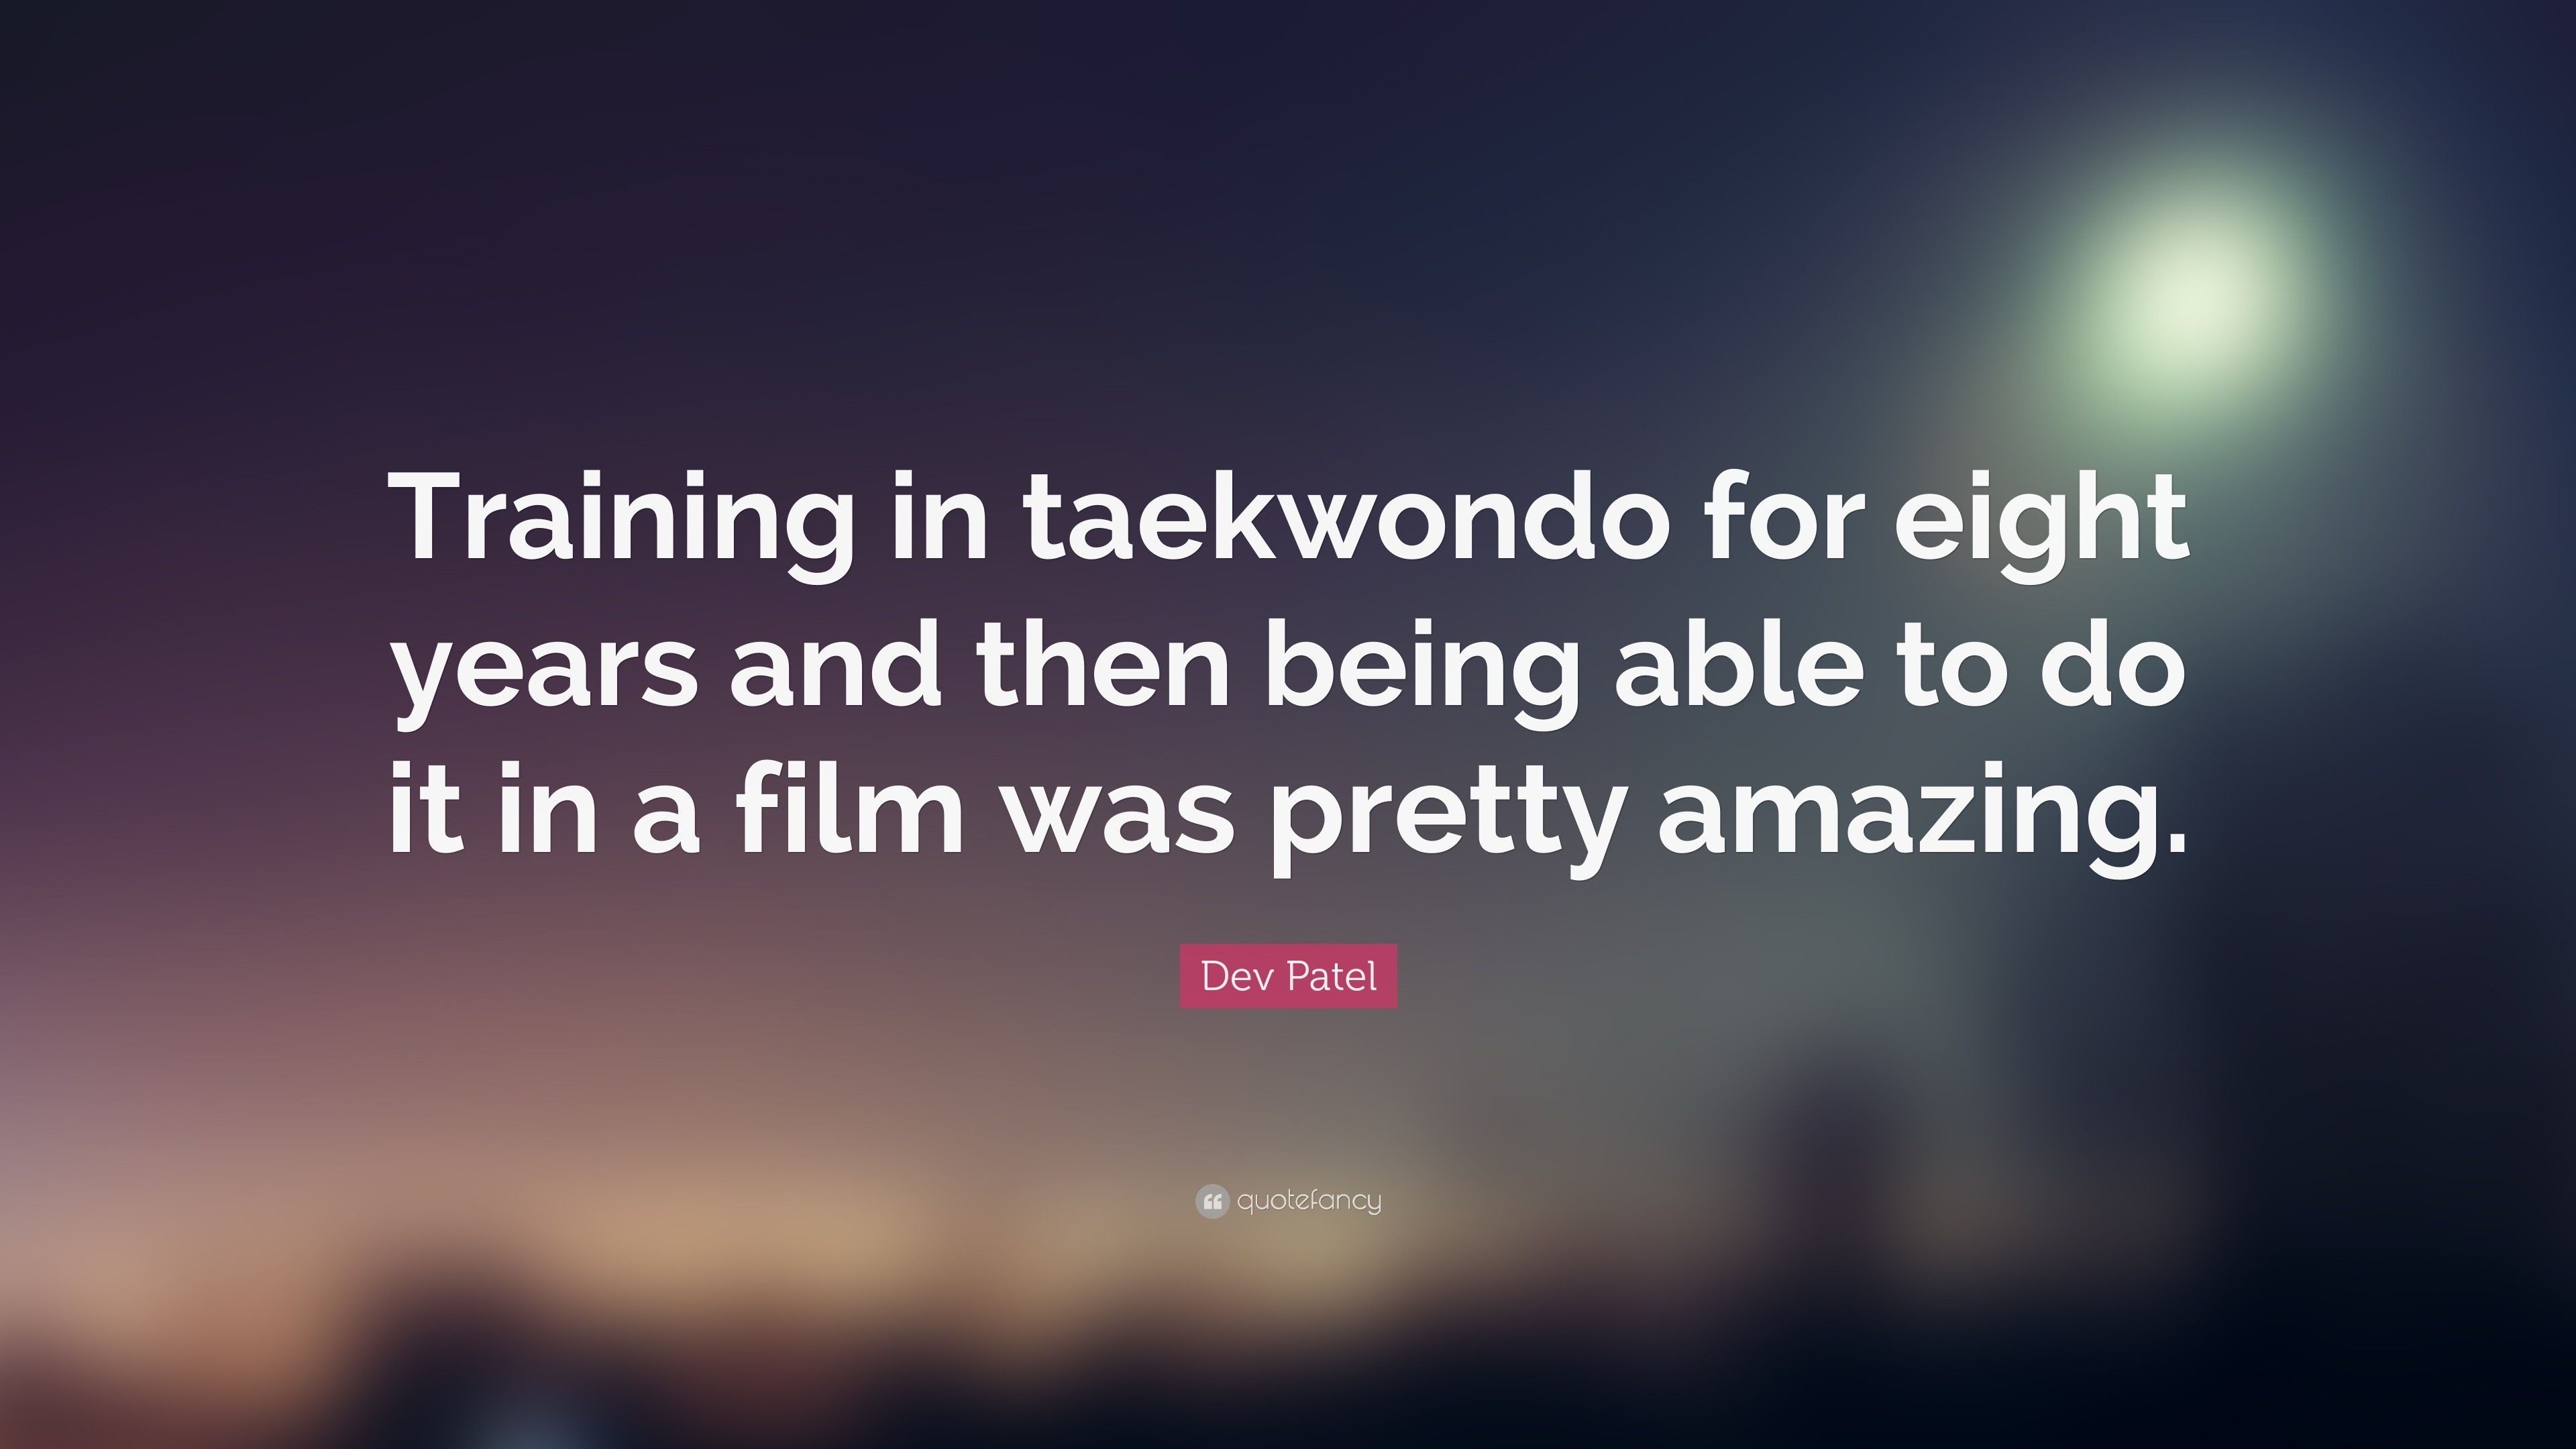 3840x2160 Dev Patel Quote: “Training in taekwondo for eight years and then being able  to